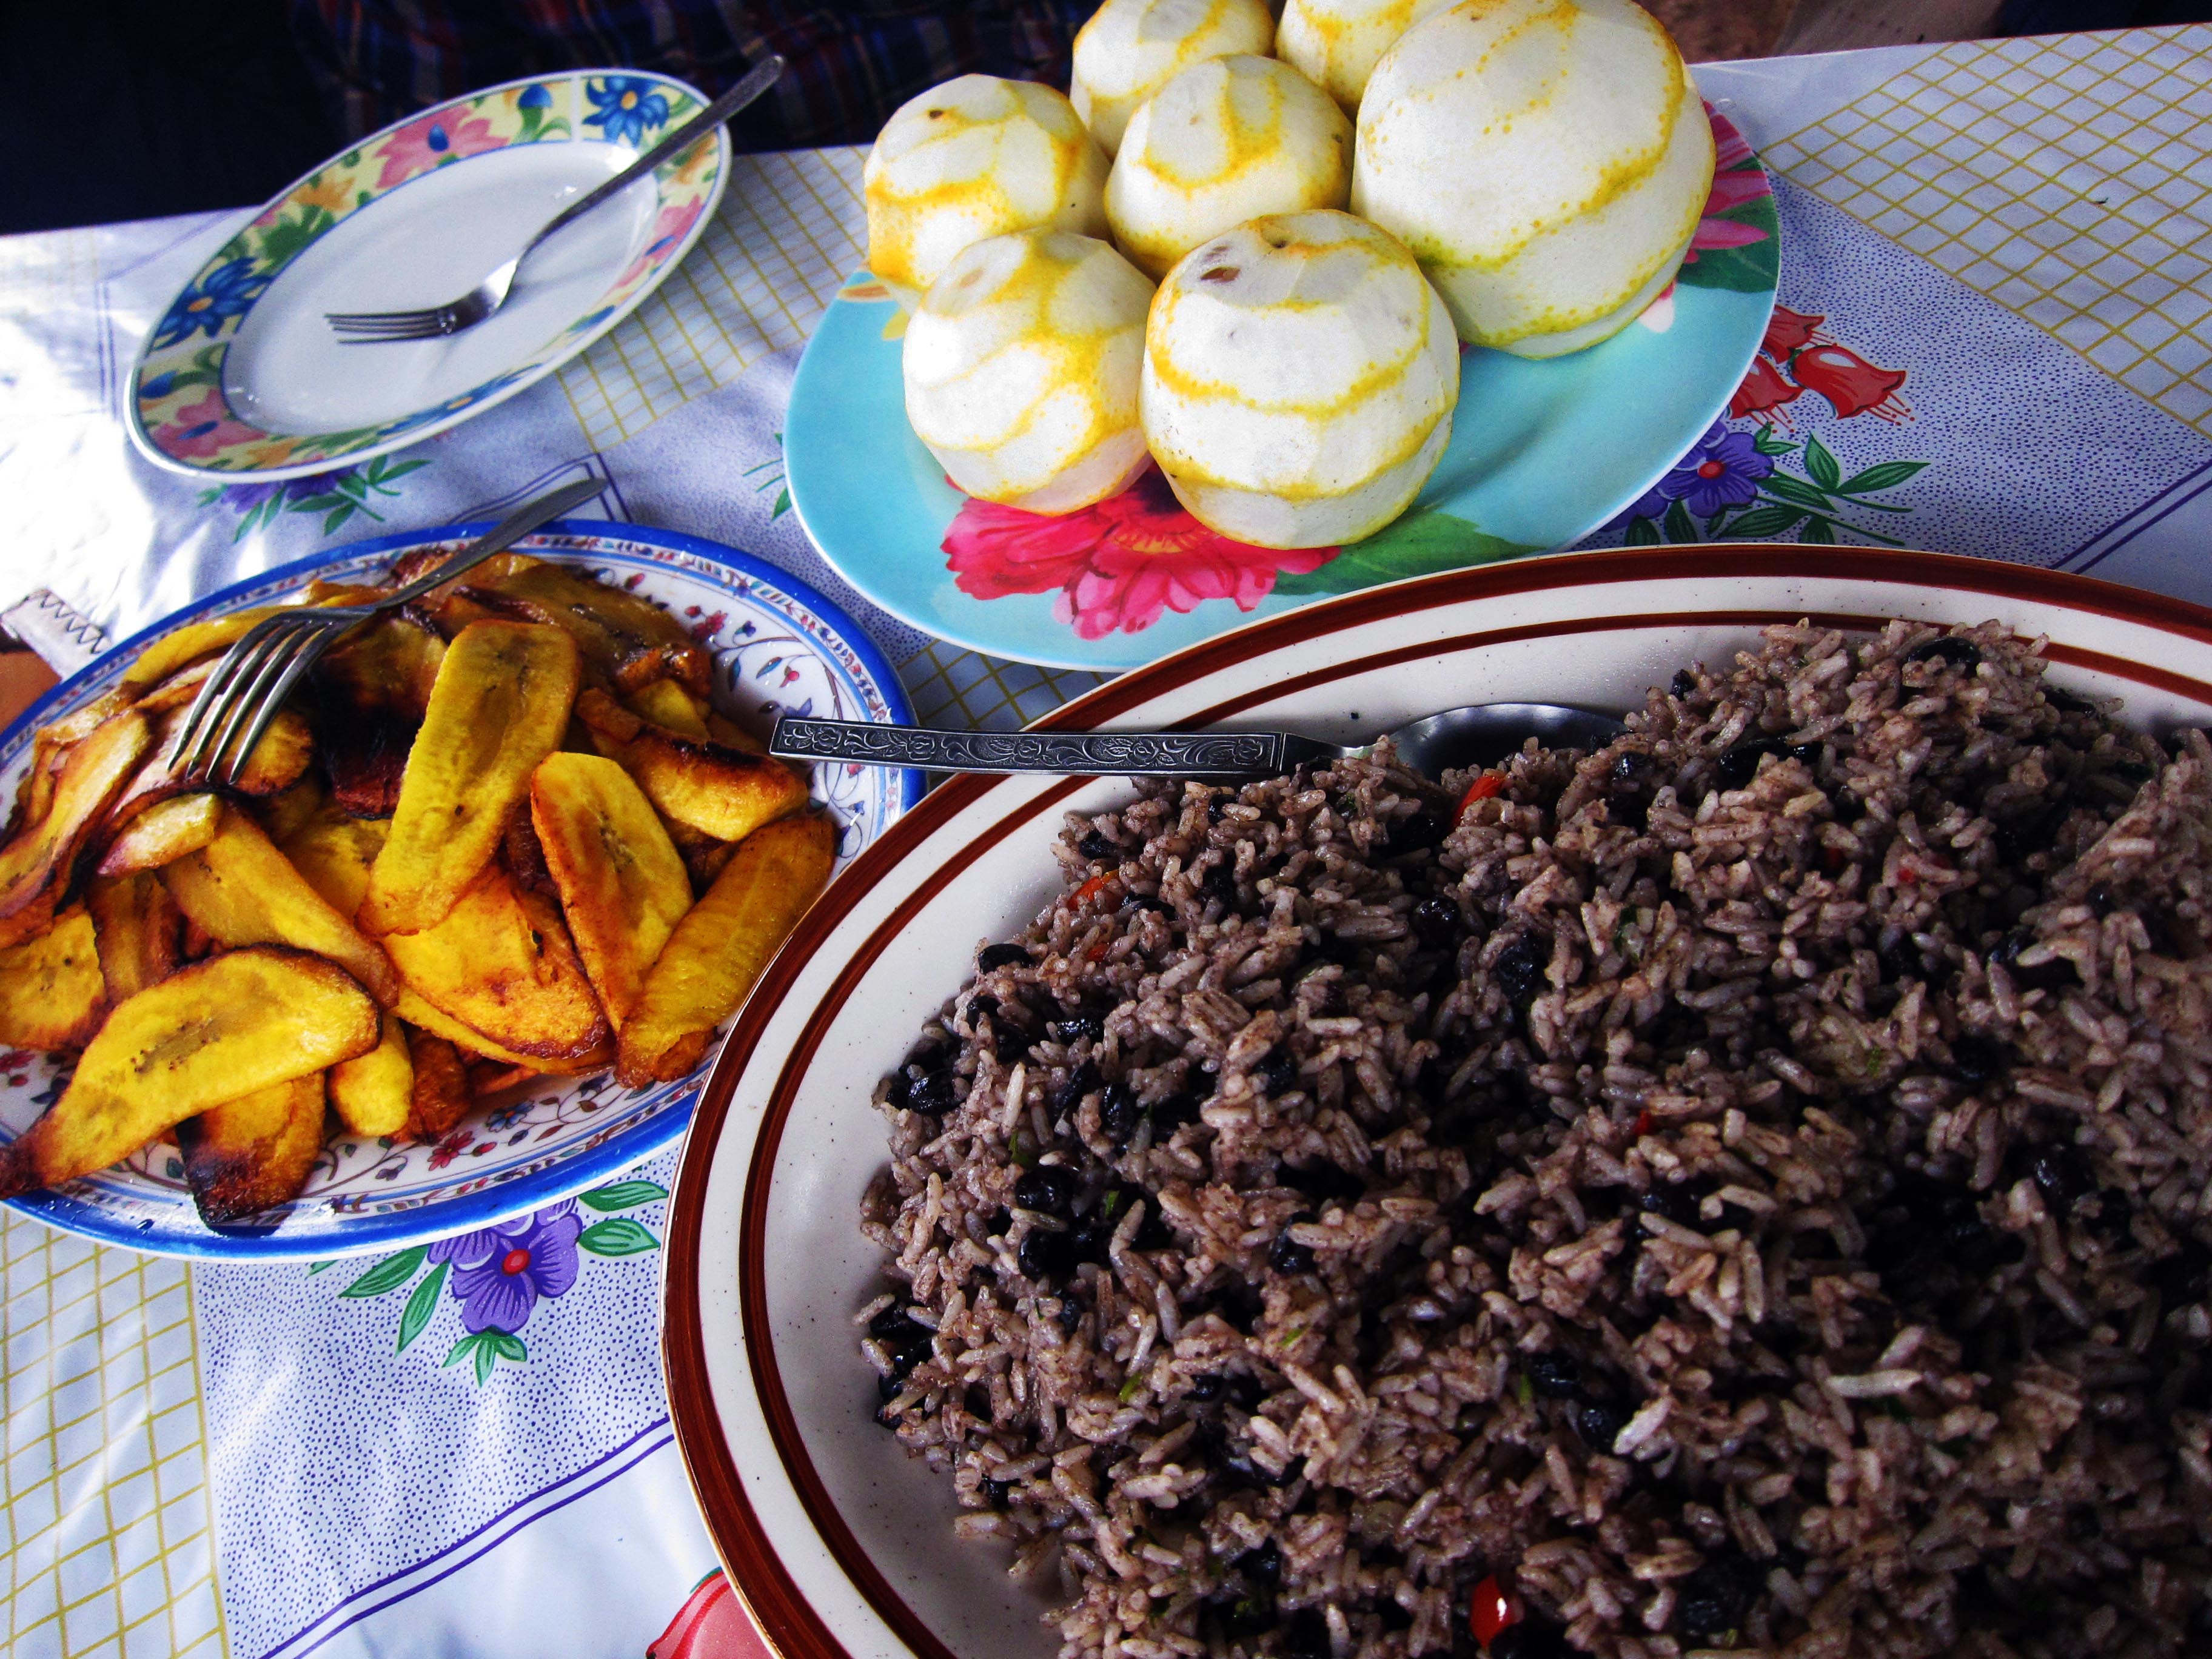 Breakfast sits on a table prepared in the traditional outdoor kitchen in Boruca. Rice and beans, fried plantains and oranges are all common foods at breakfast, as well as other daily meals.